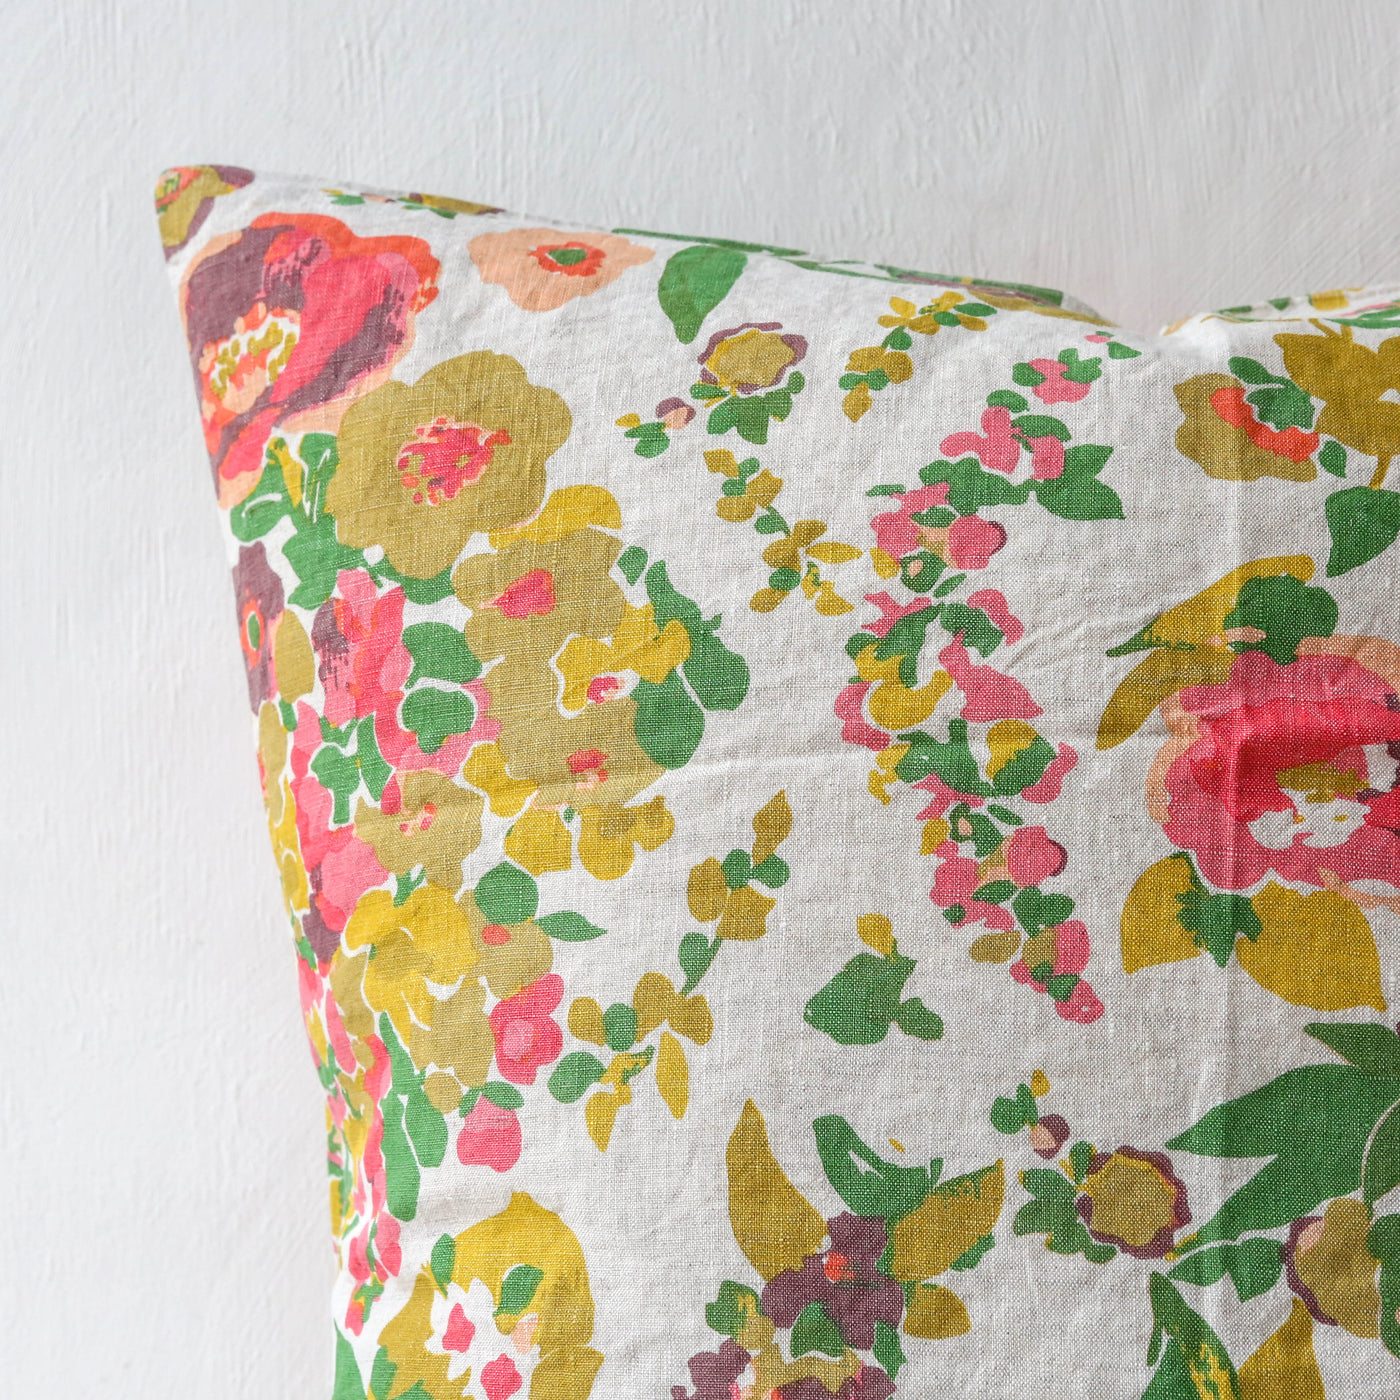 'Marianne's Floral' Linen Cushion Cover